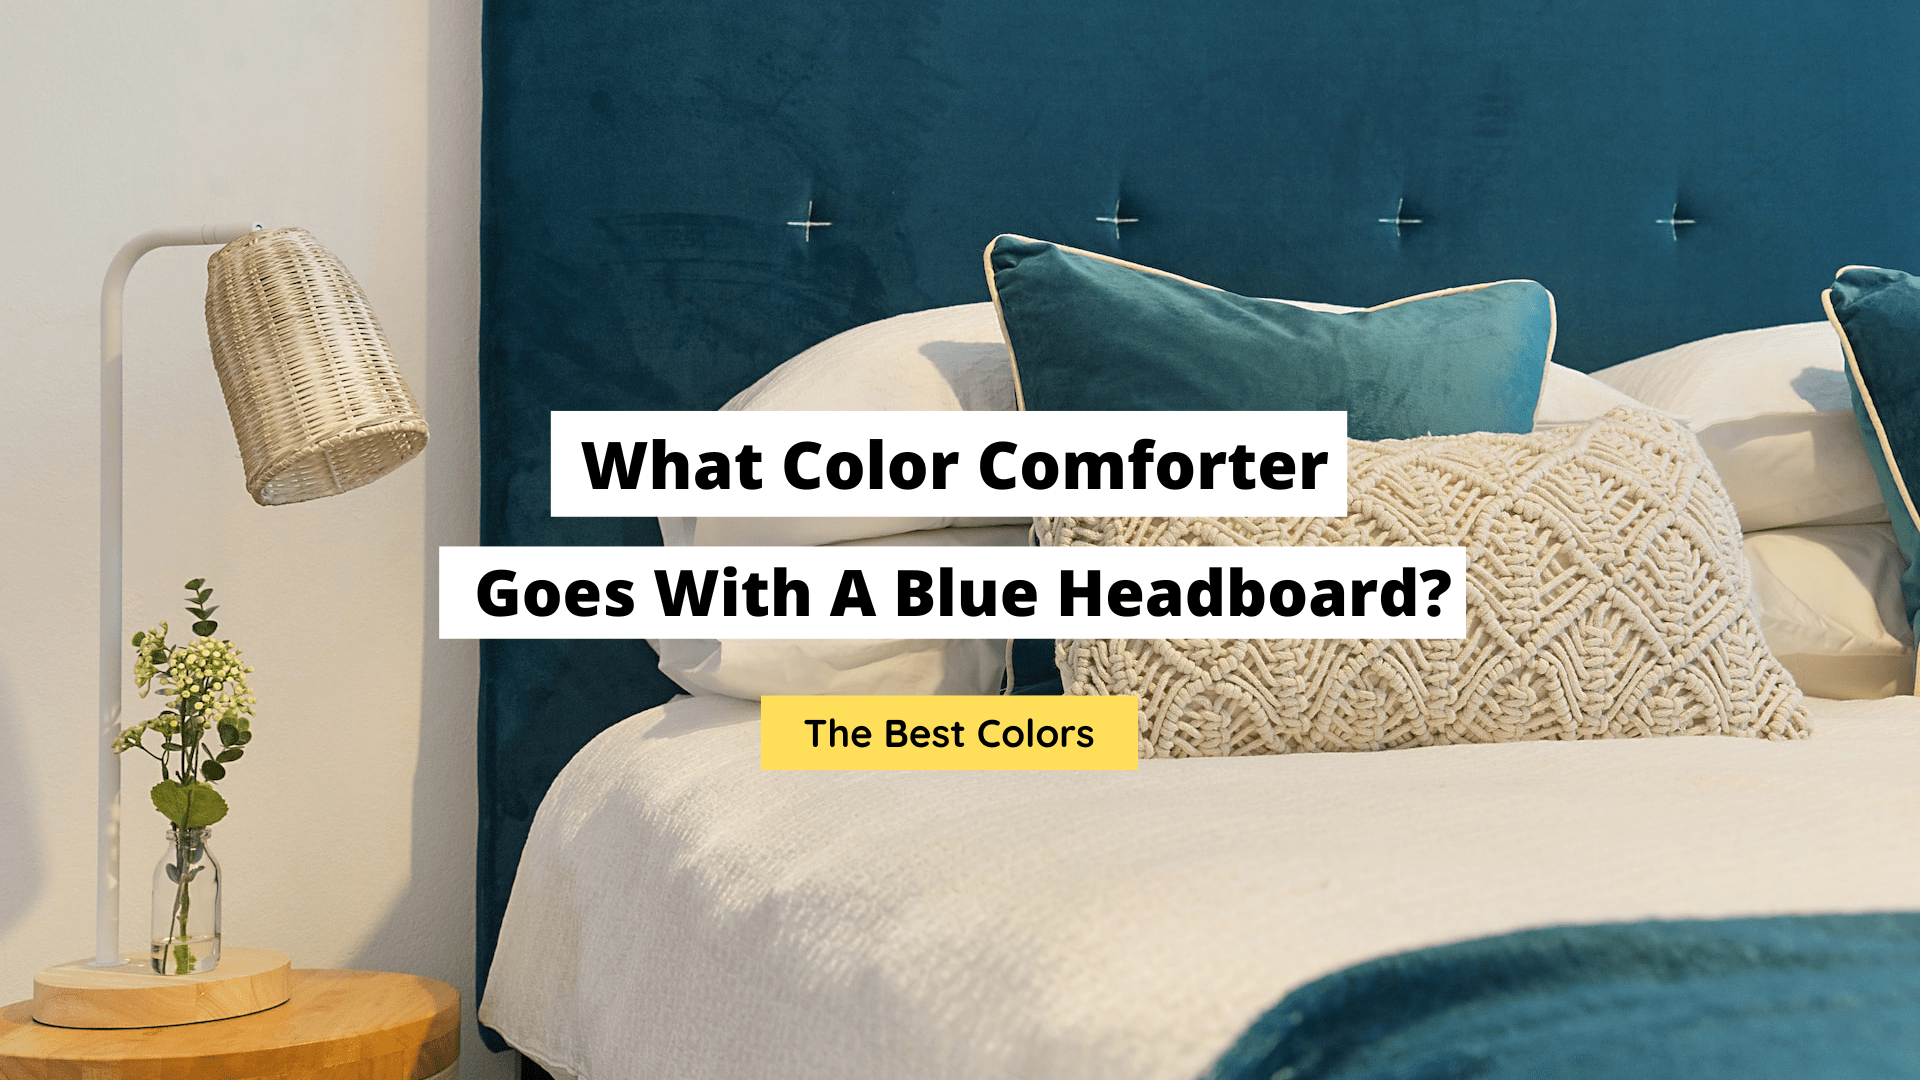 What Color Comforter Goes With A Blue Headboard